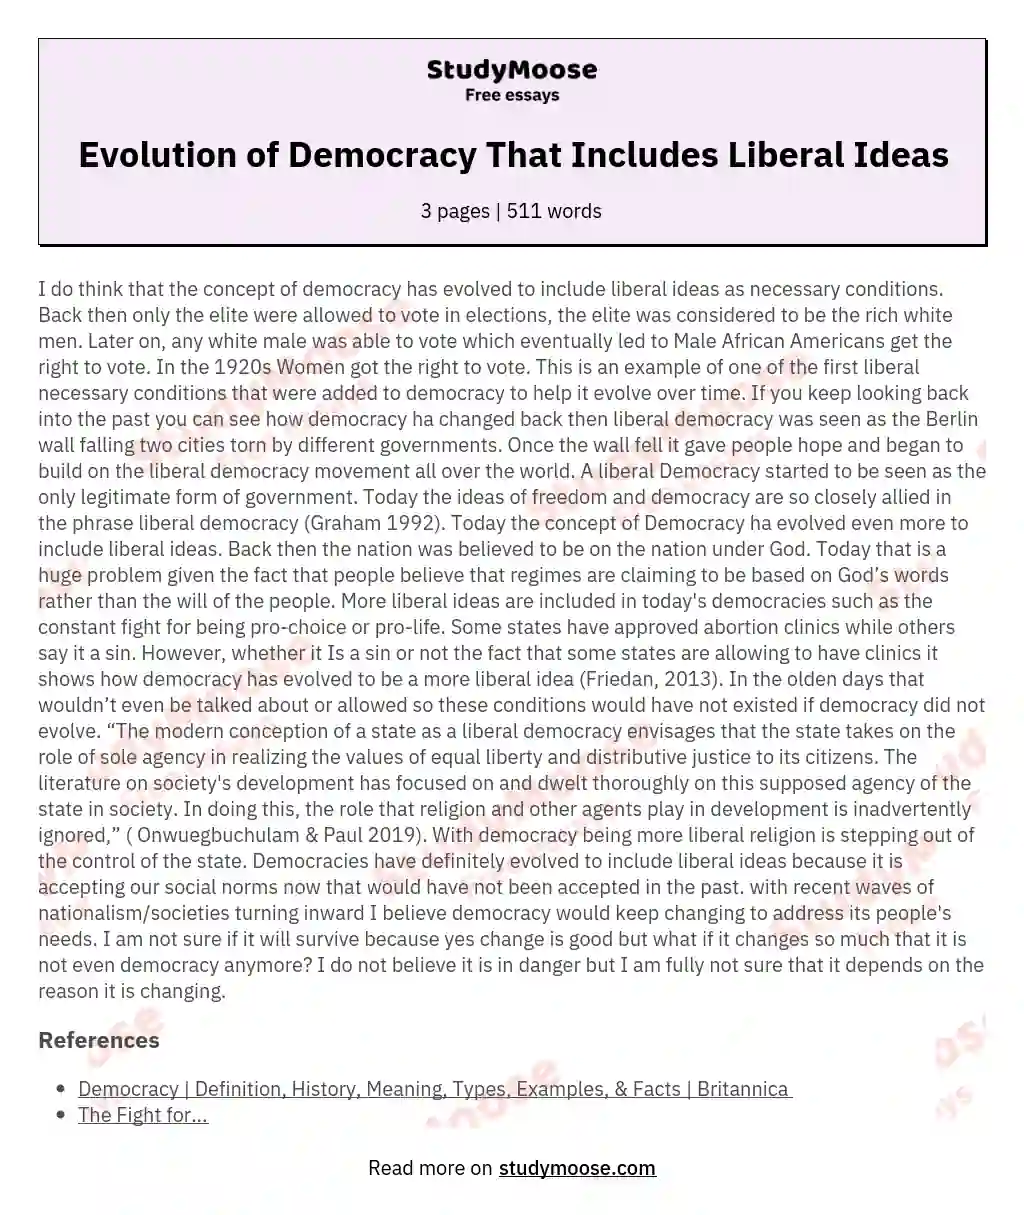 Evolution of Democracy That Includes Liberal Ideas essay